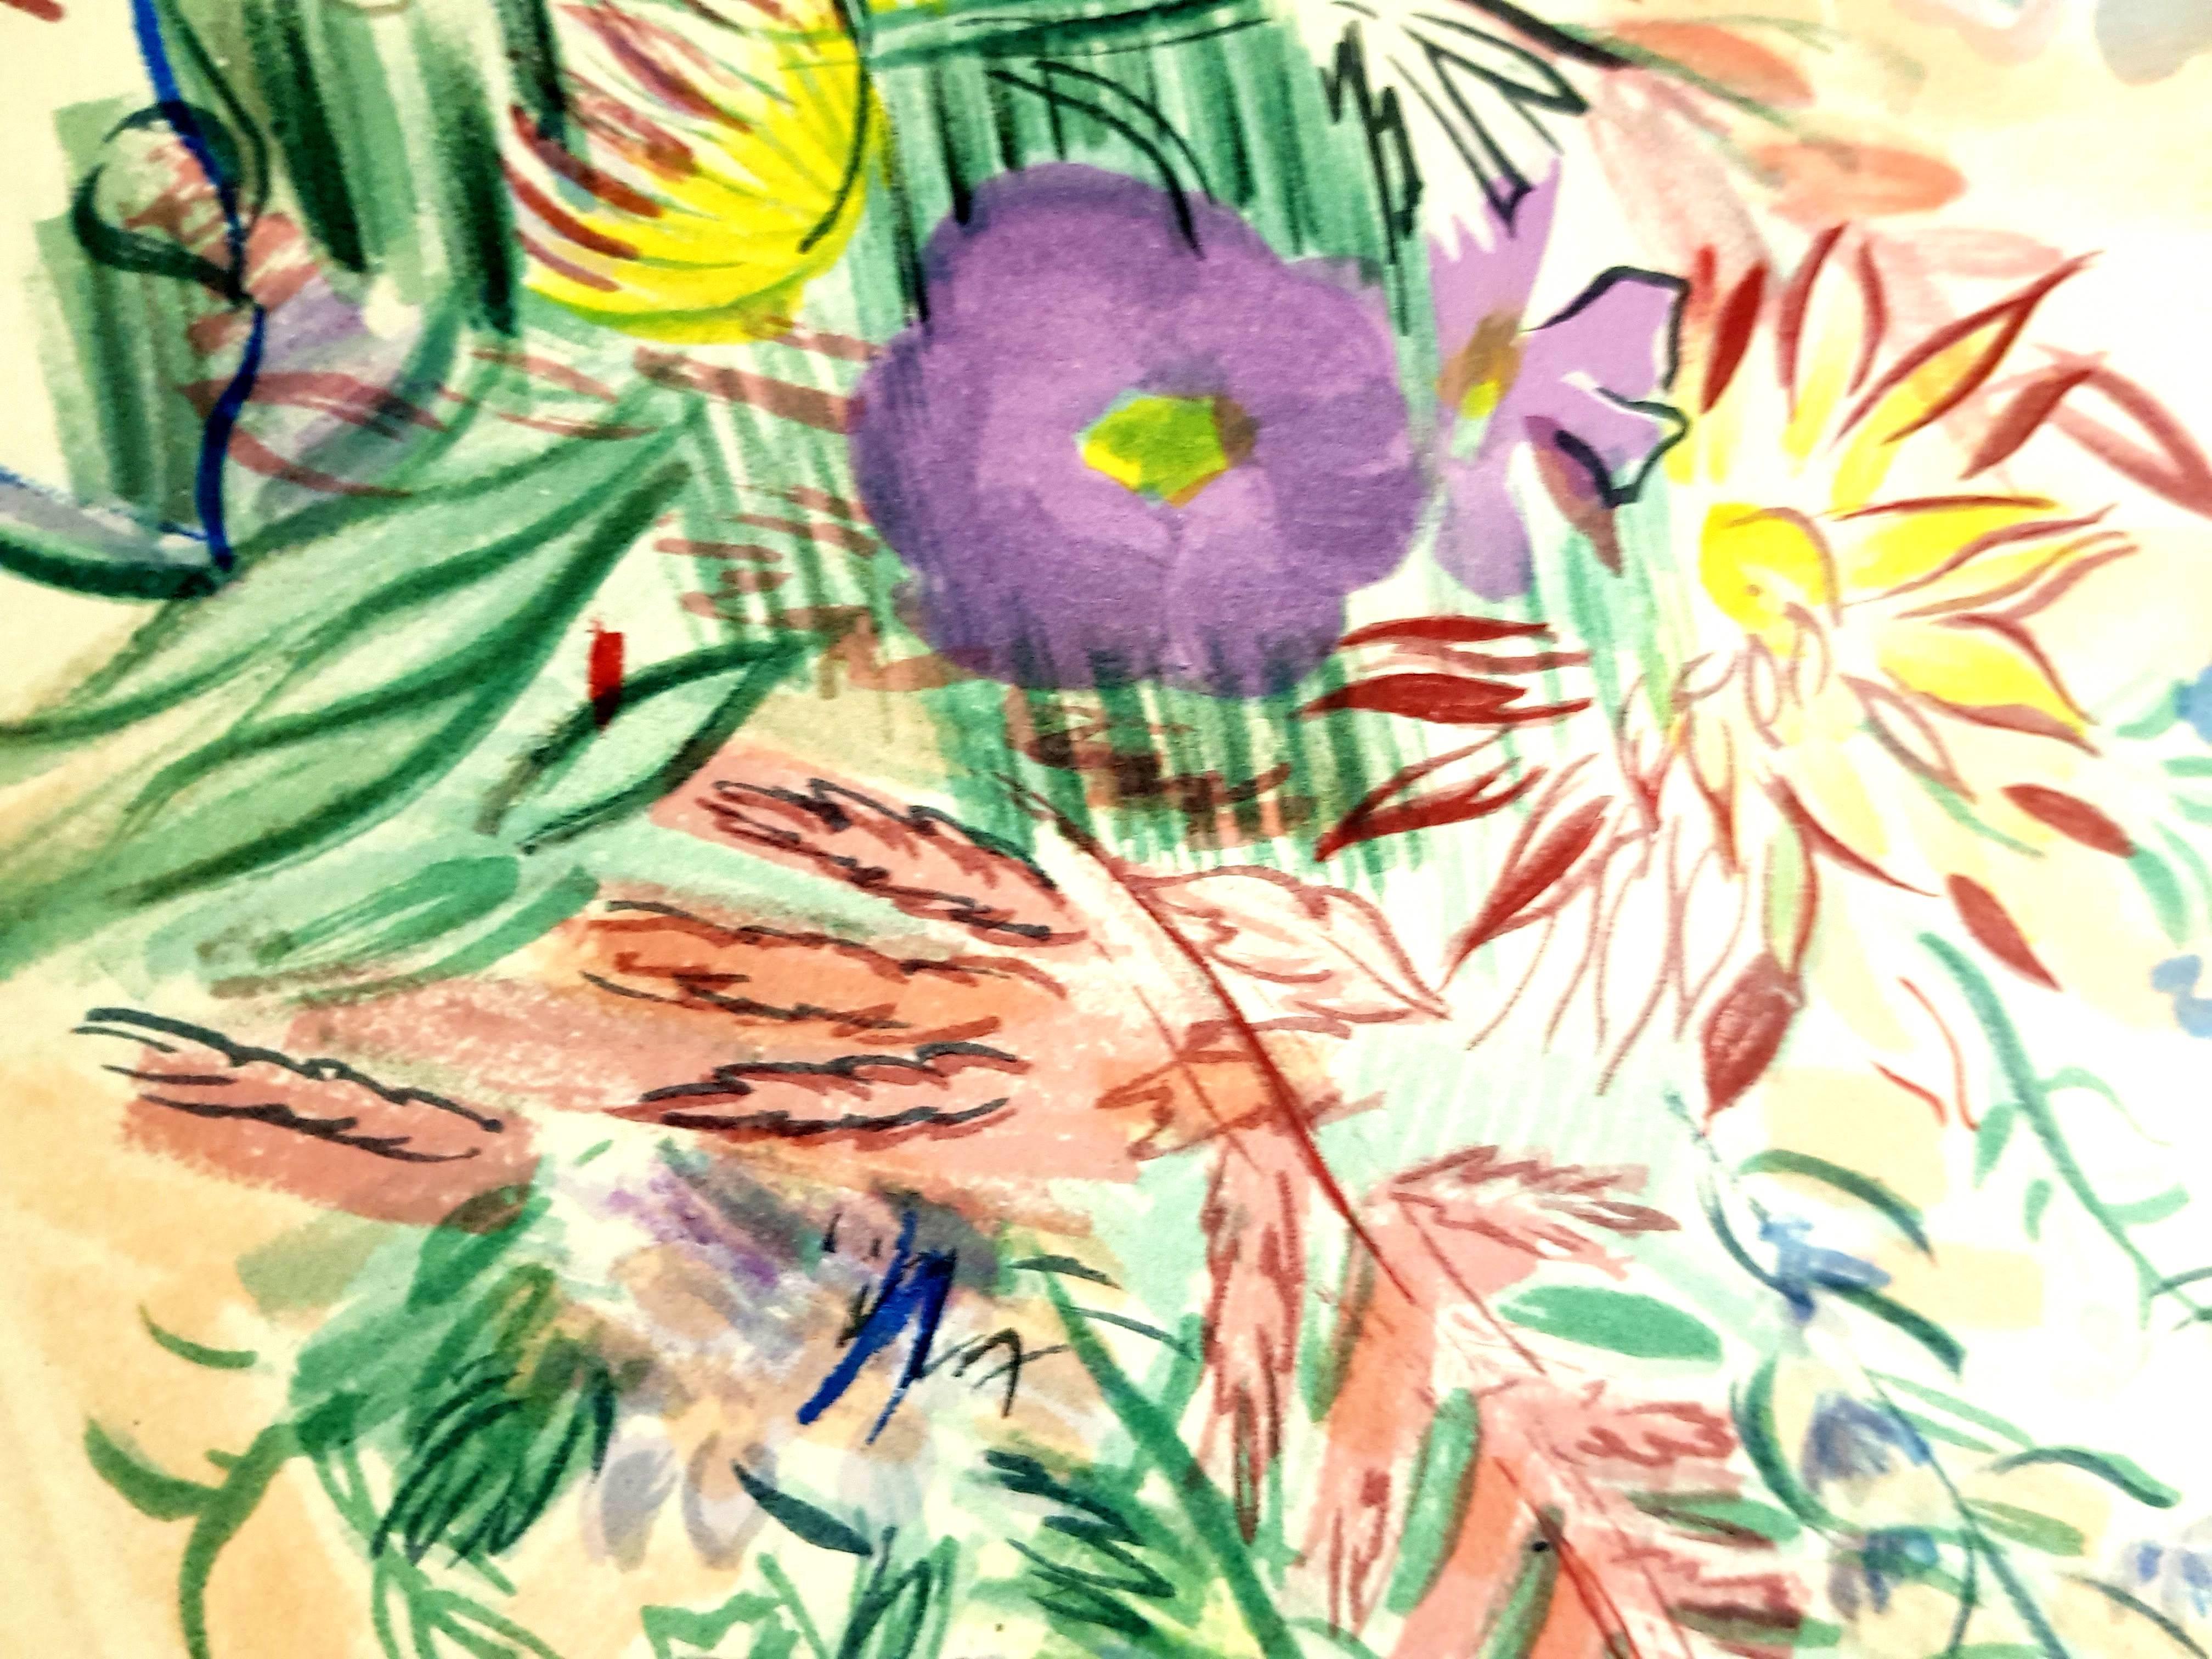 Flowers - Lithograph - Modern Print by (after) Raoul Dufy